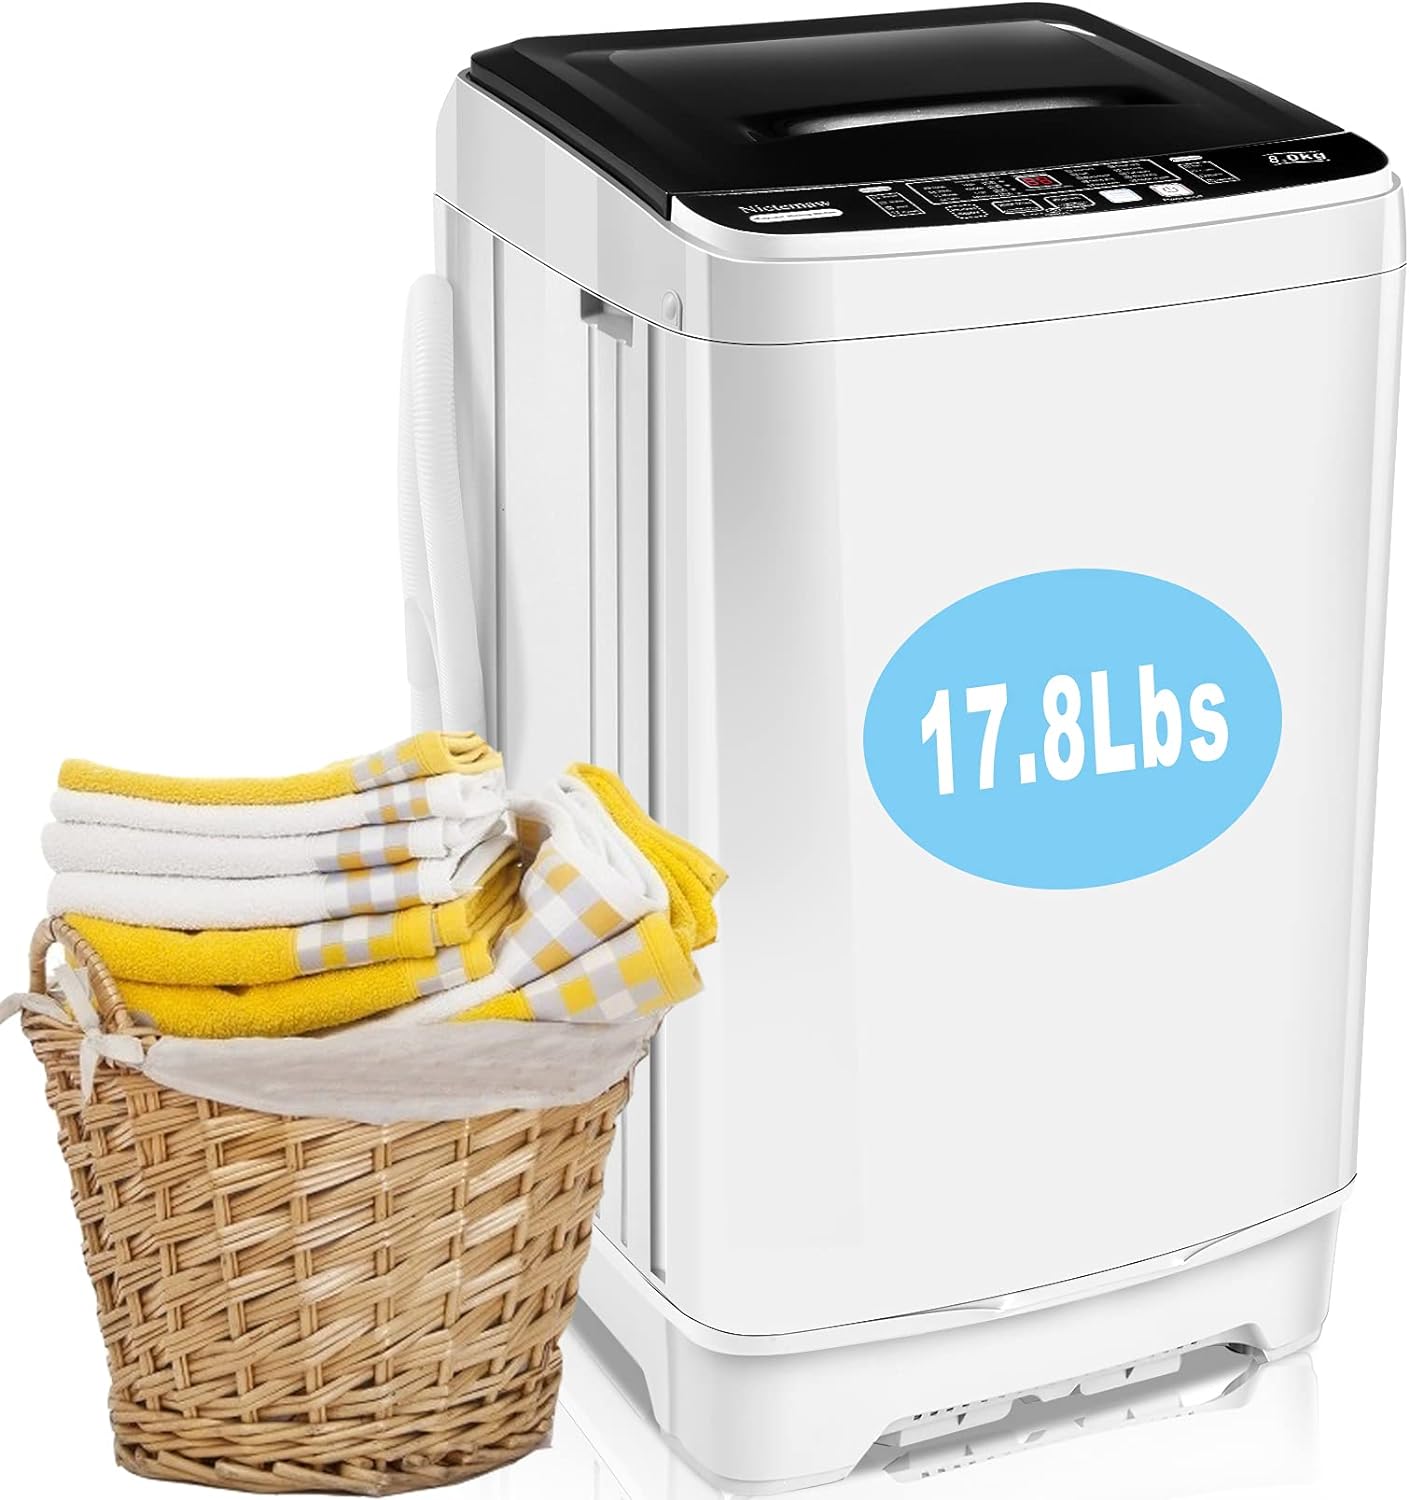 17.8Lbs Portable Washing Machine Nictemaw Portable Washer, 2.3 Cu.ft Washer and Dryer Combo with Drain Pump, 10 Programs 8 Water Level Compact Laundry Washer for Home, Apartment, RV, Dorms